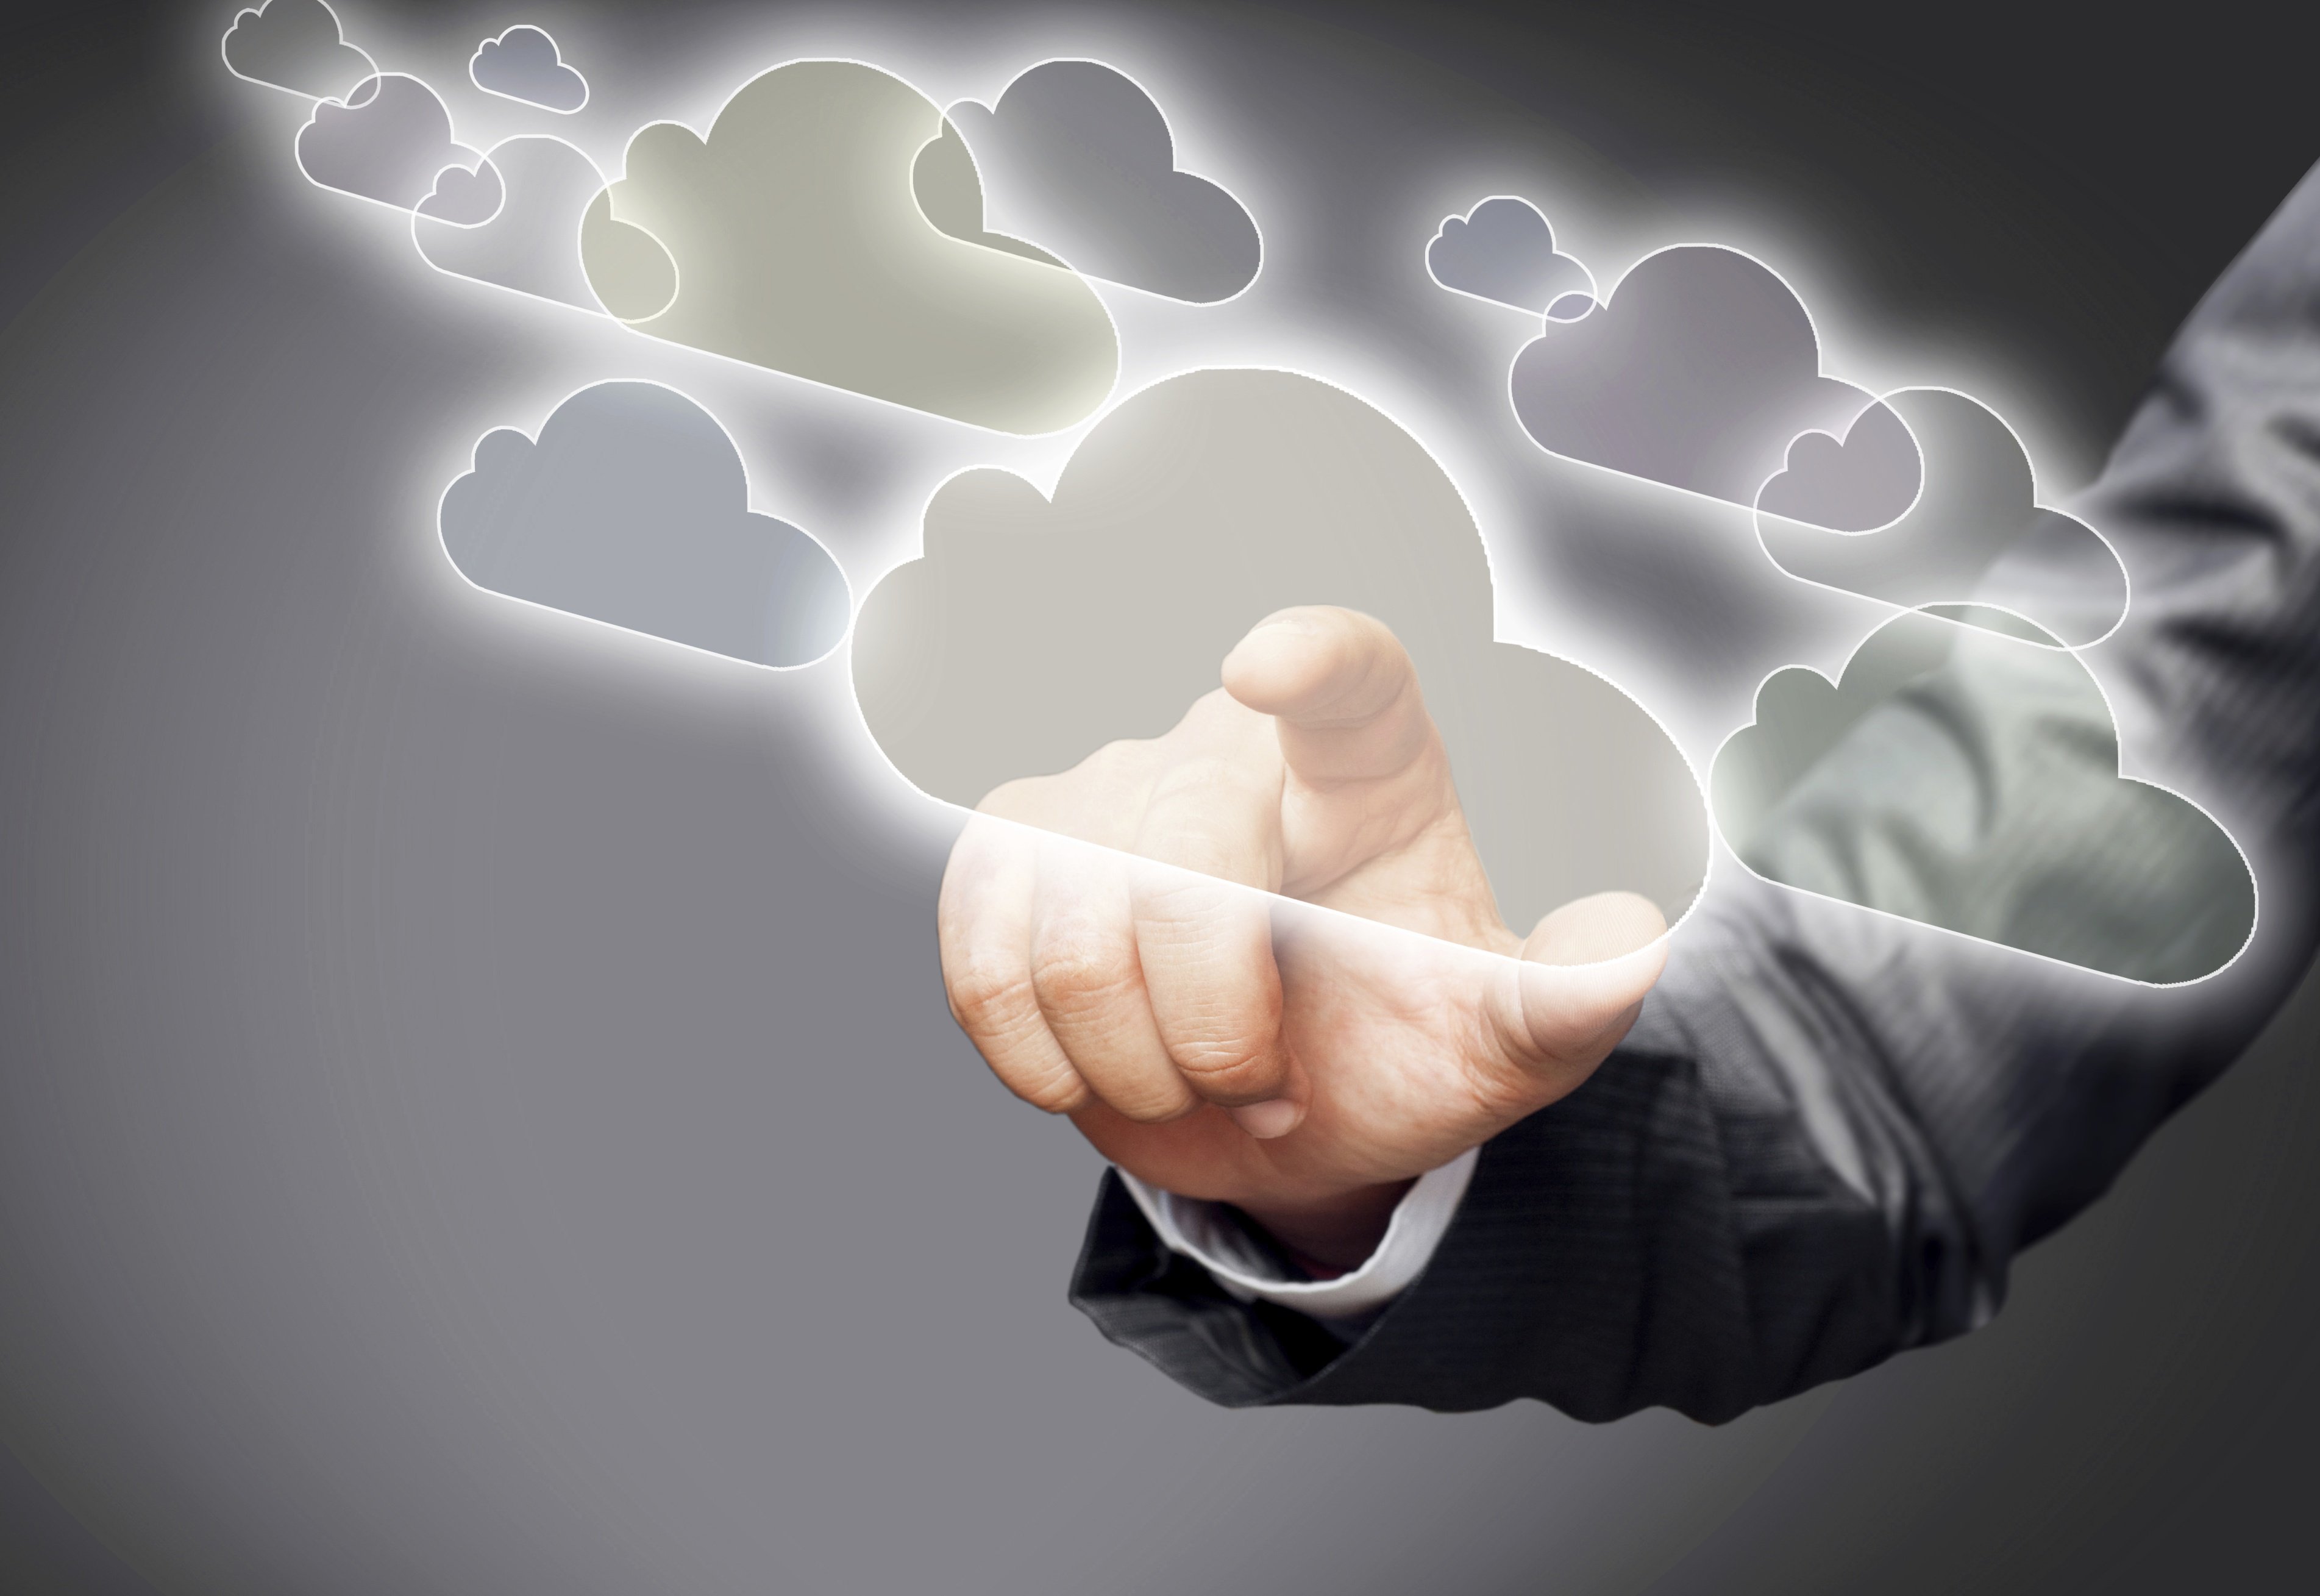 4 Questions to Ask When Choosing a Cloud Contact Center Solution